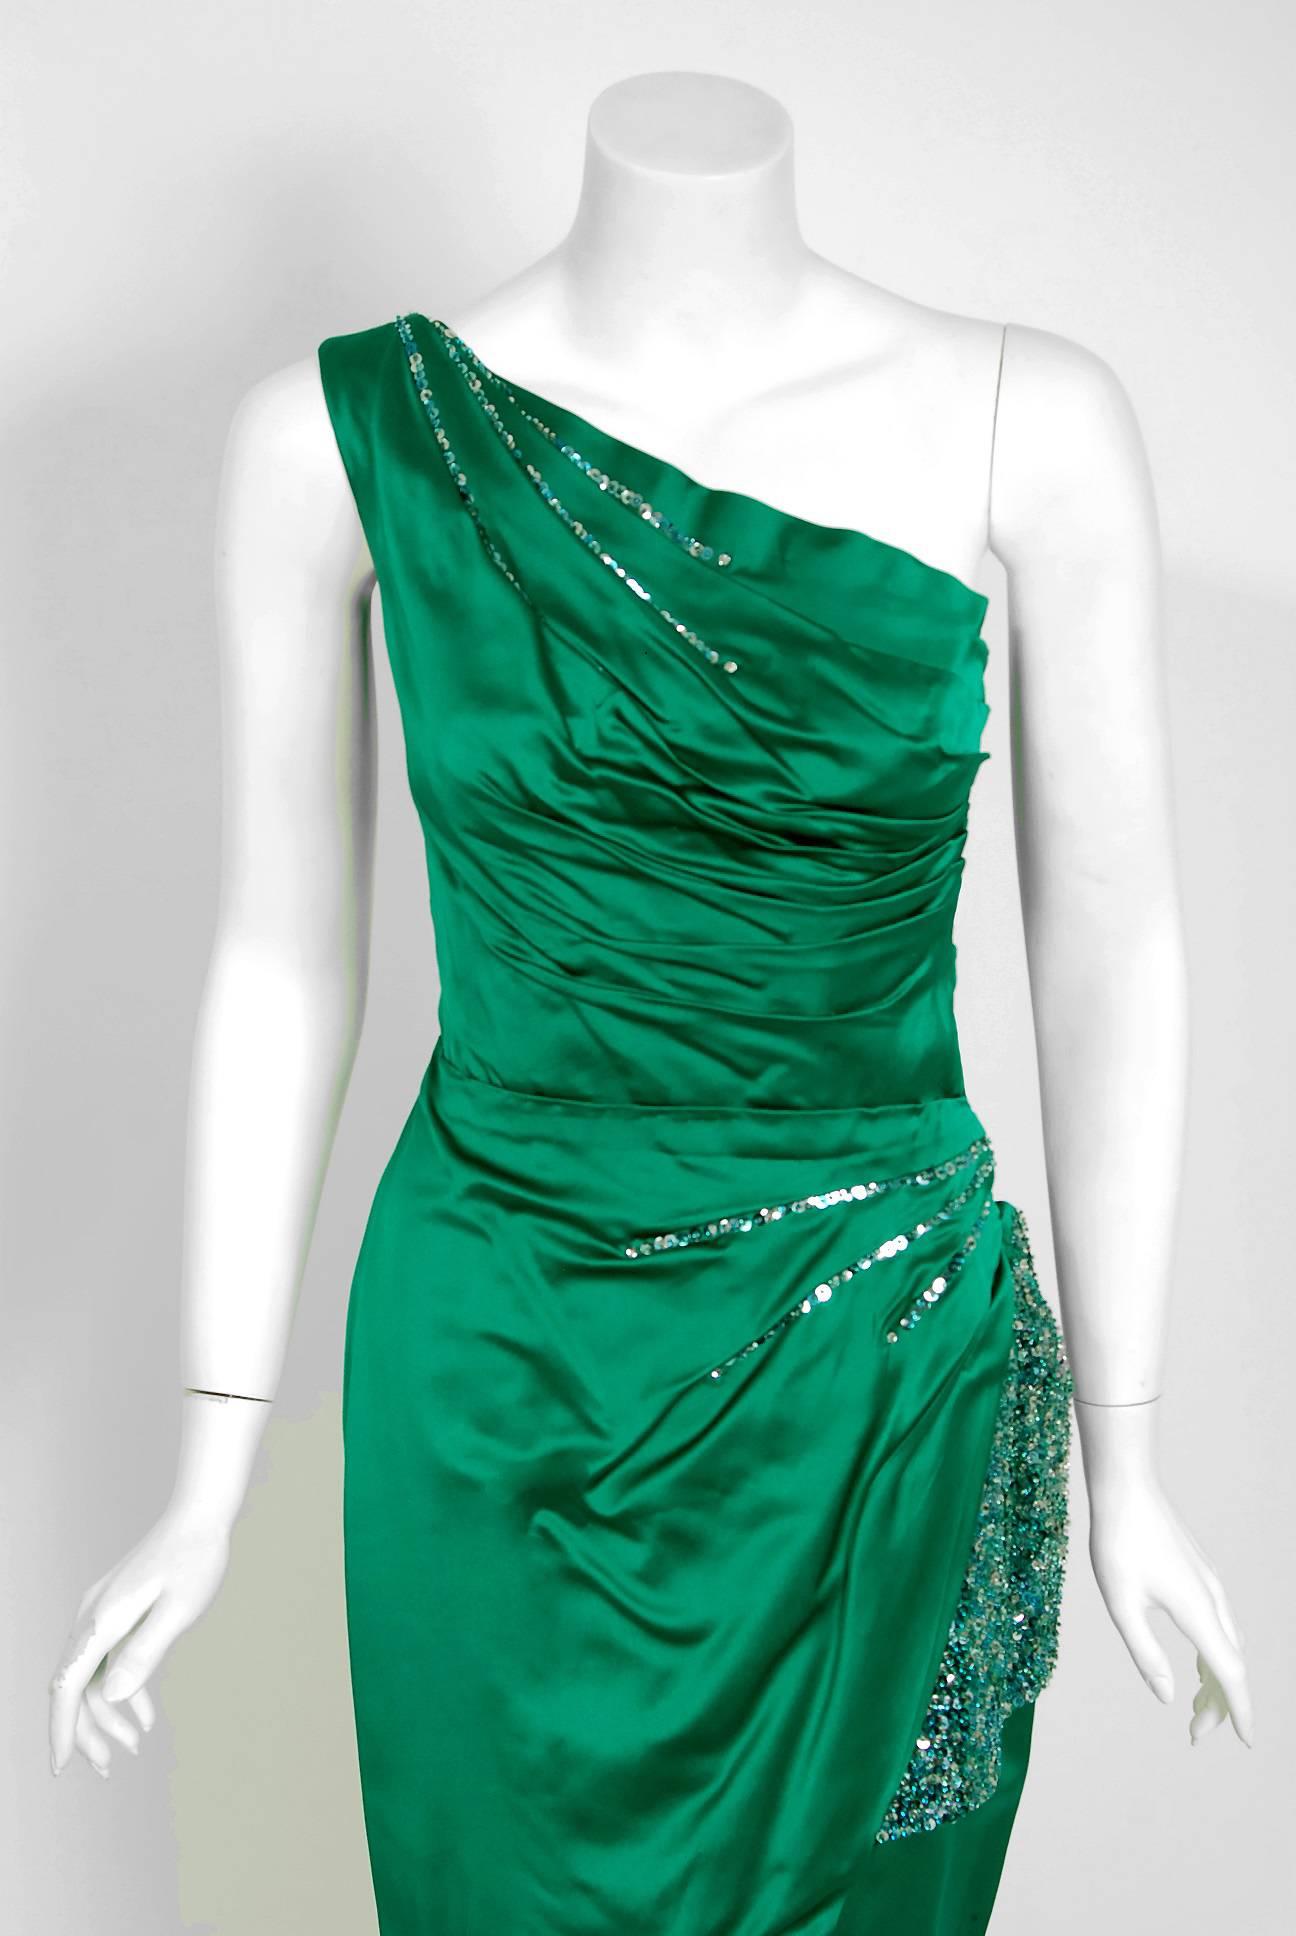 This is such a seductive and dramatic evening gown from the iconic Ceil Chapman designer label. Perfect for any upcoming event; you can't help but feel feminine in this beauty! The garment is fashioned from stunning mid-weight green silk satin.